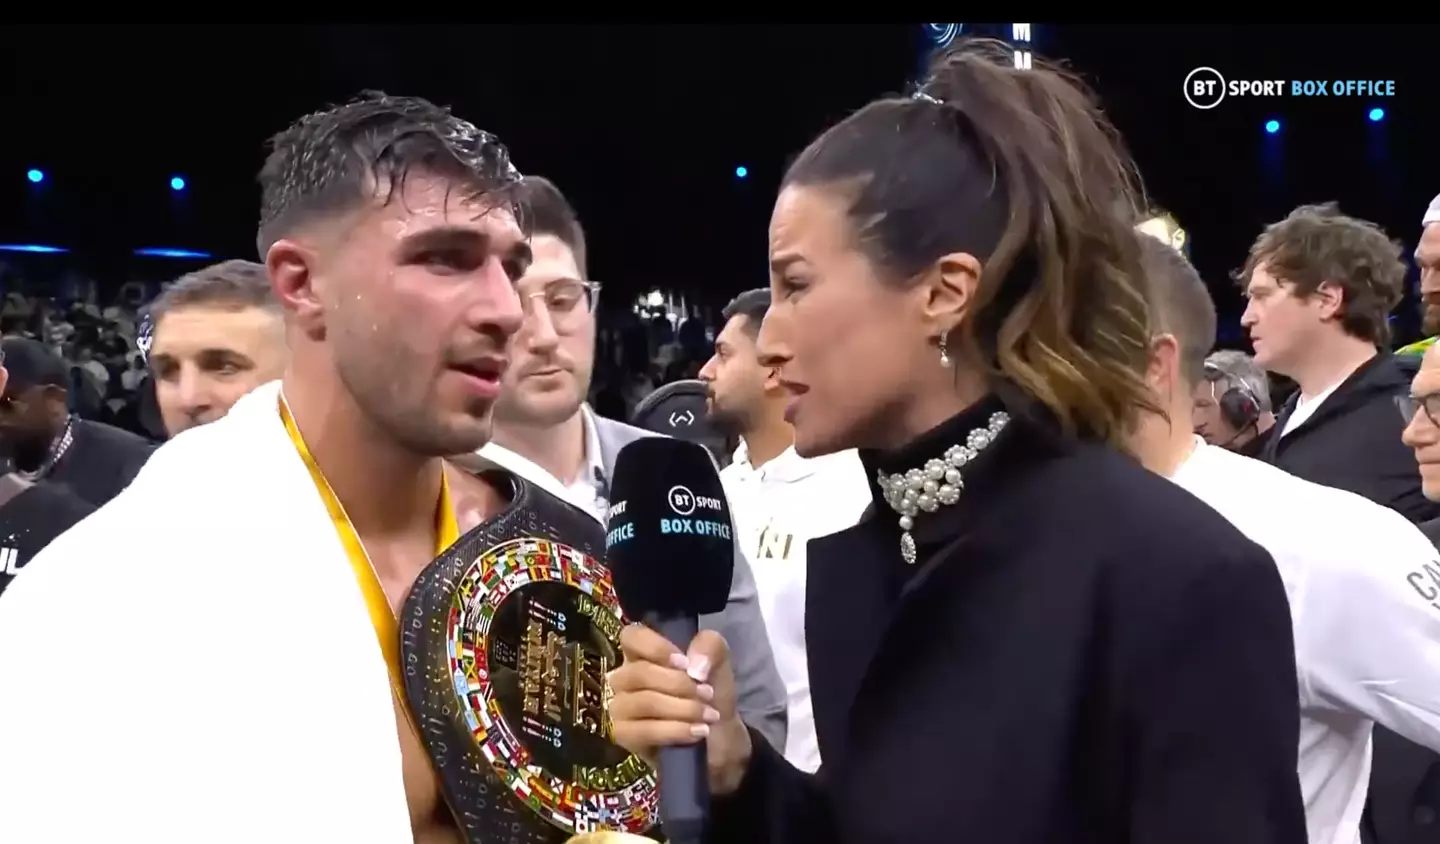 Tommy Fury gave his thoughts post-fight.